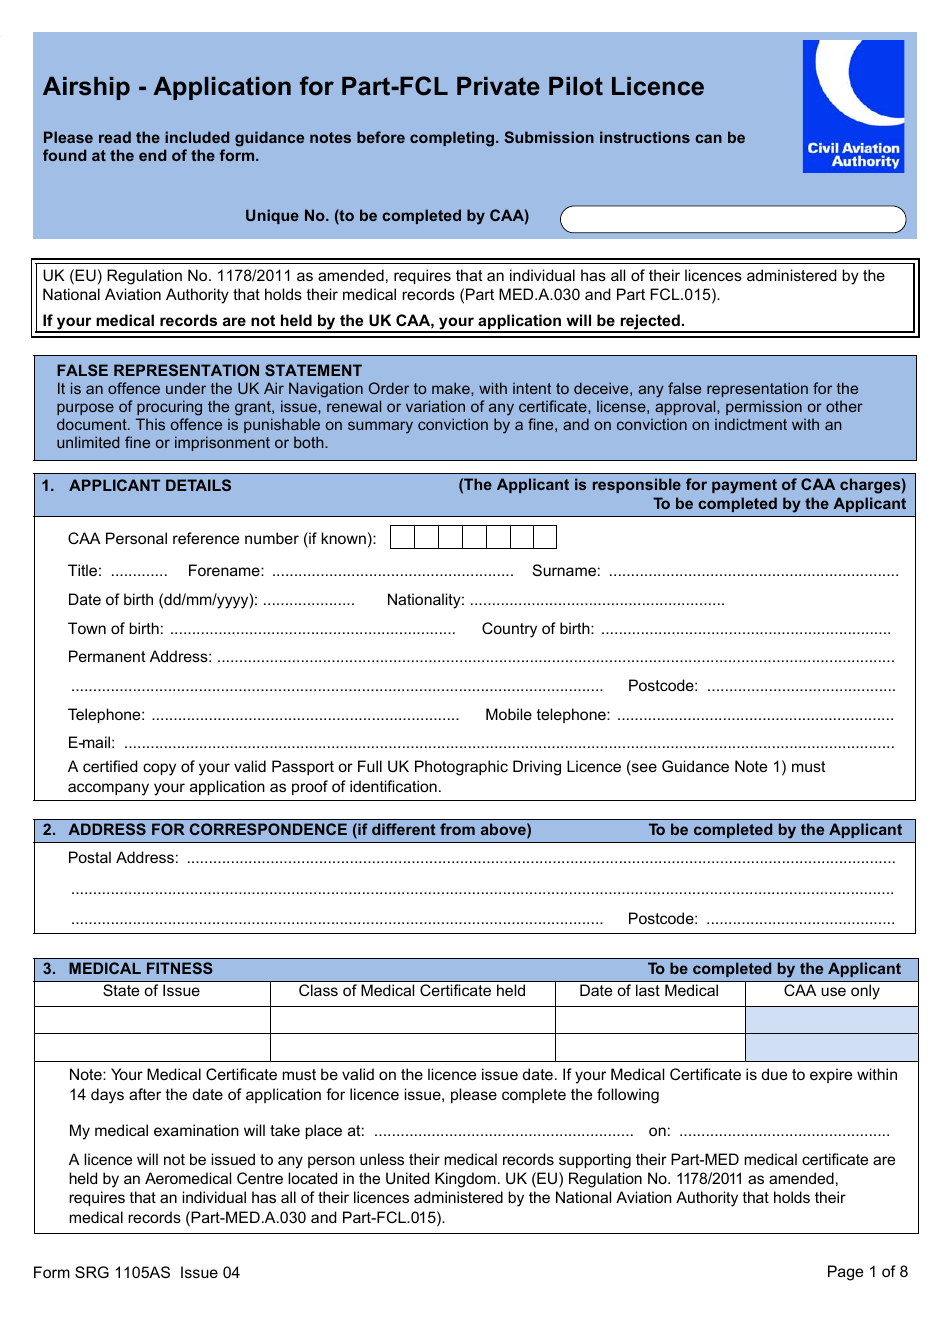 Form SRG1105AS Airship - Application for Part-Fcl Private Pilot Licence - United Kingdom, Page 1